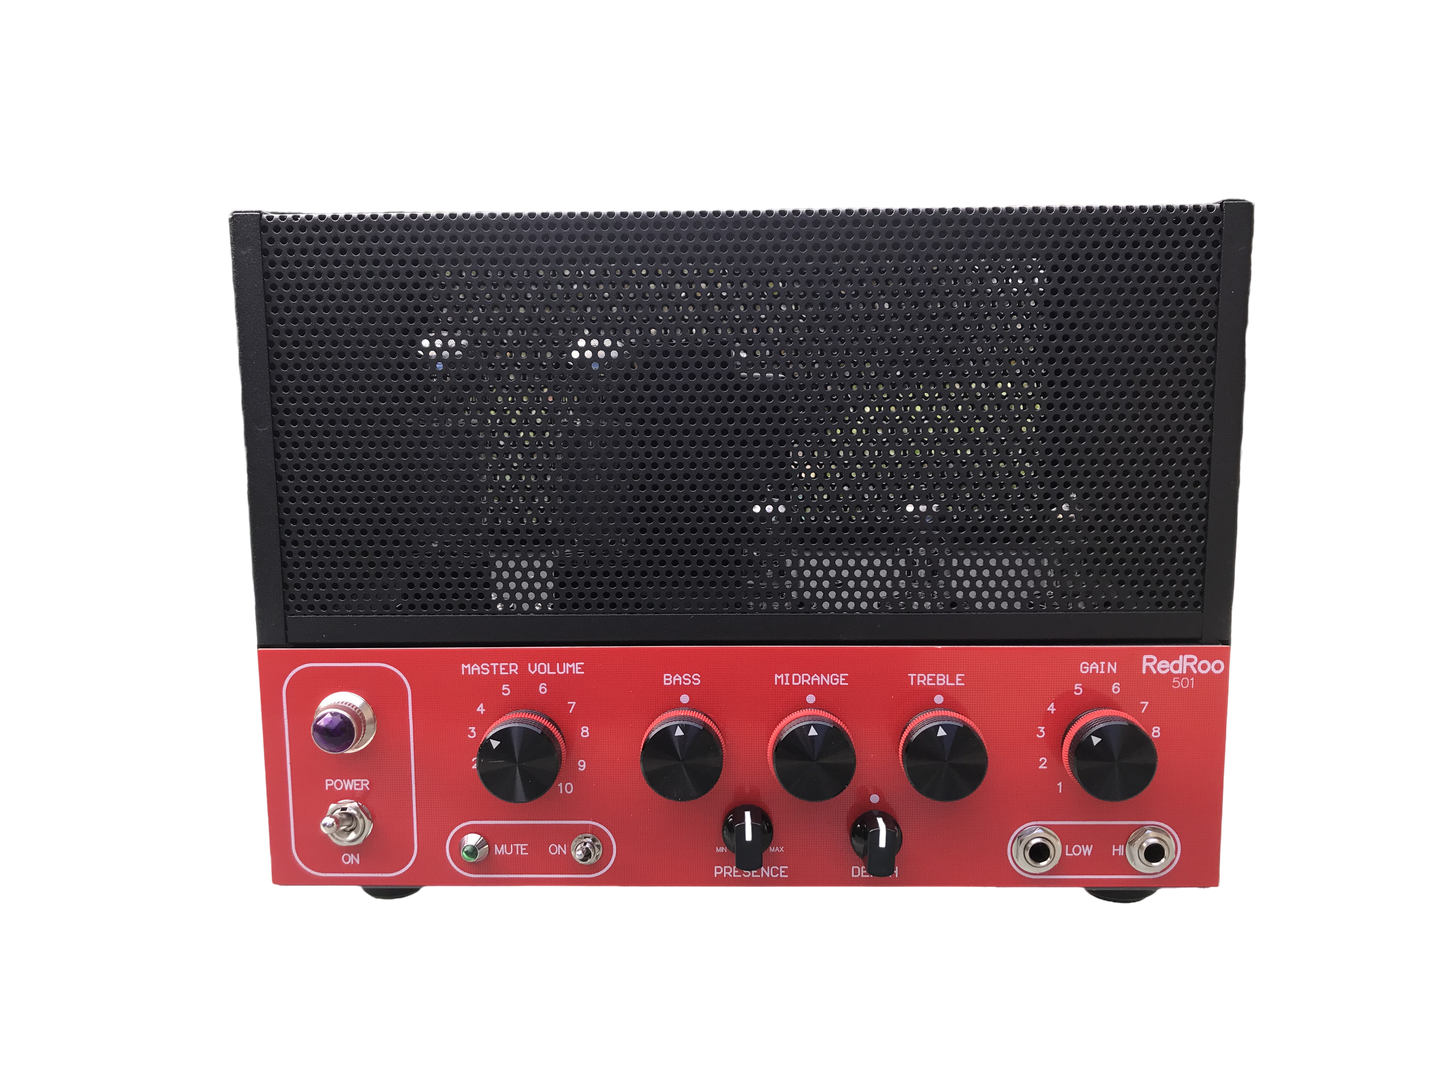 Red Roo Rockstar Guitar Amp - An Amp Camp experience